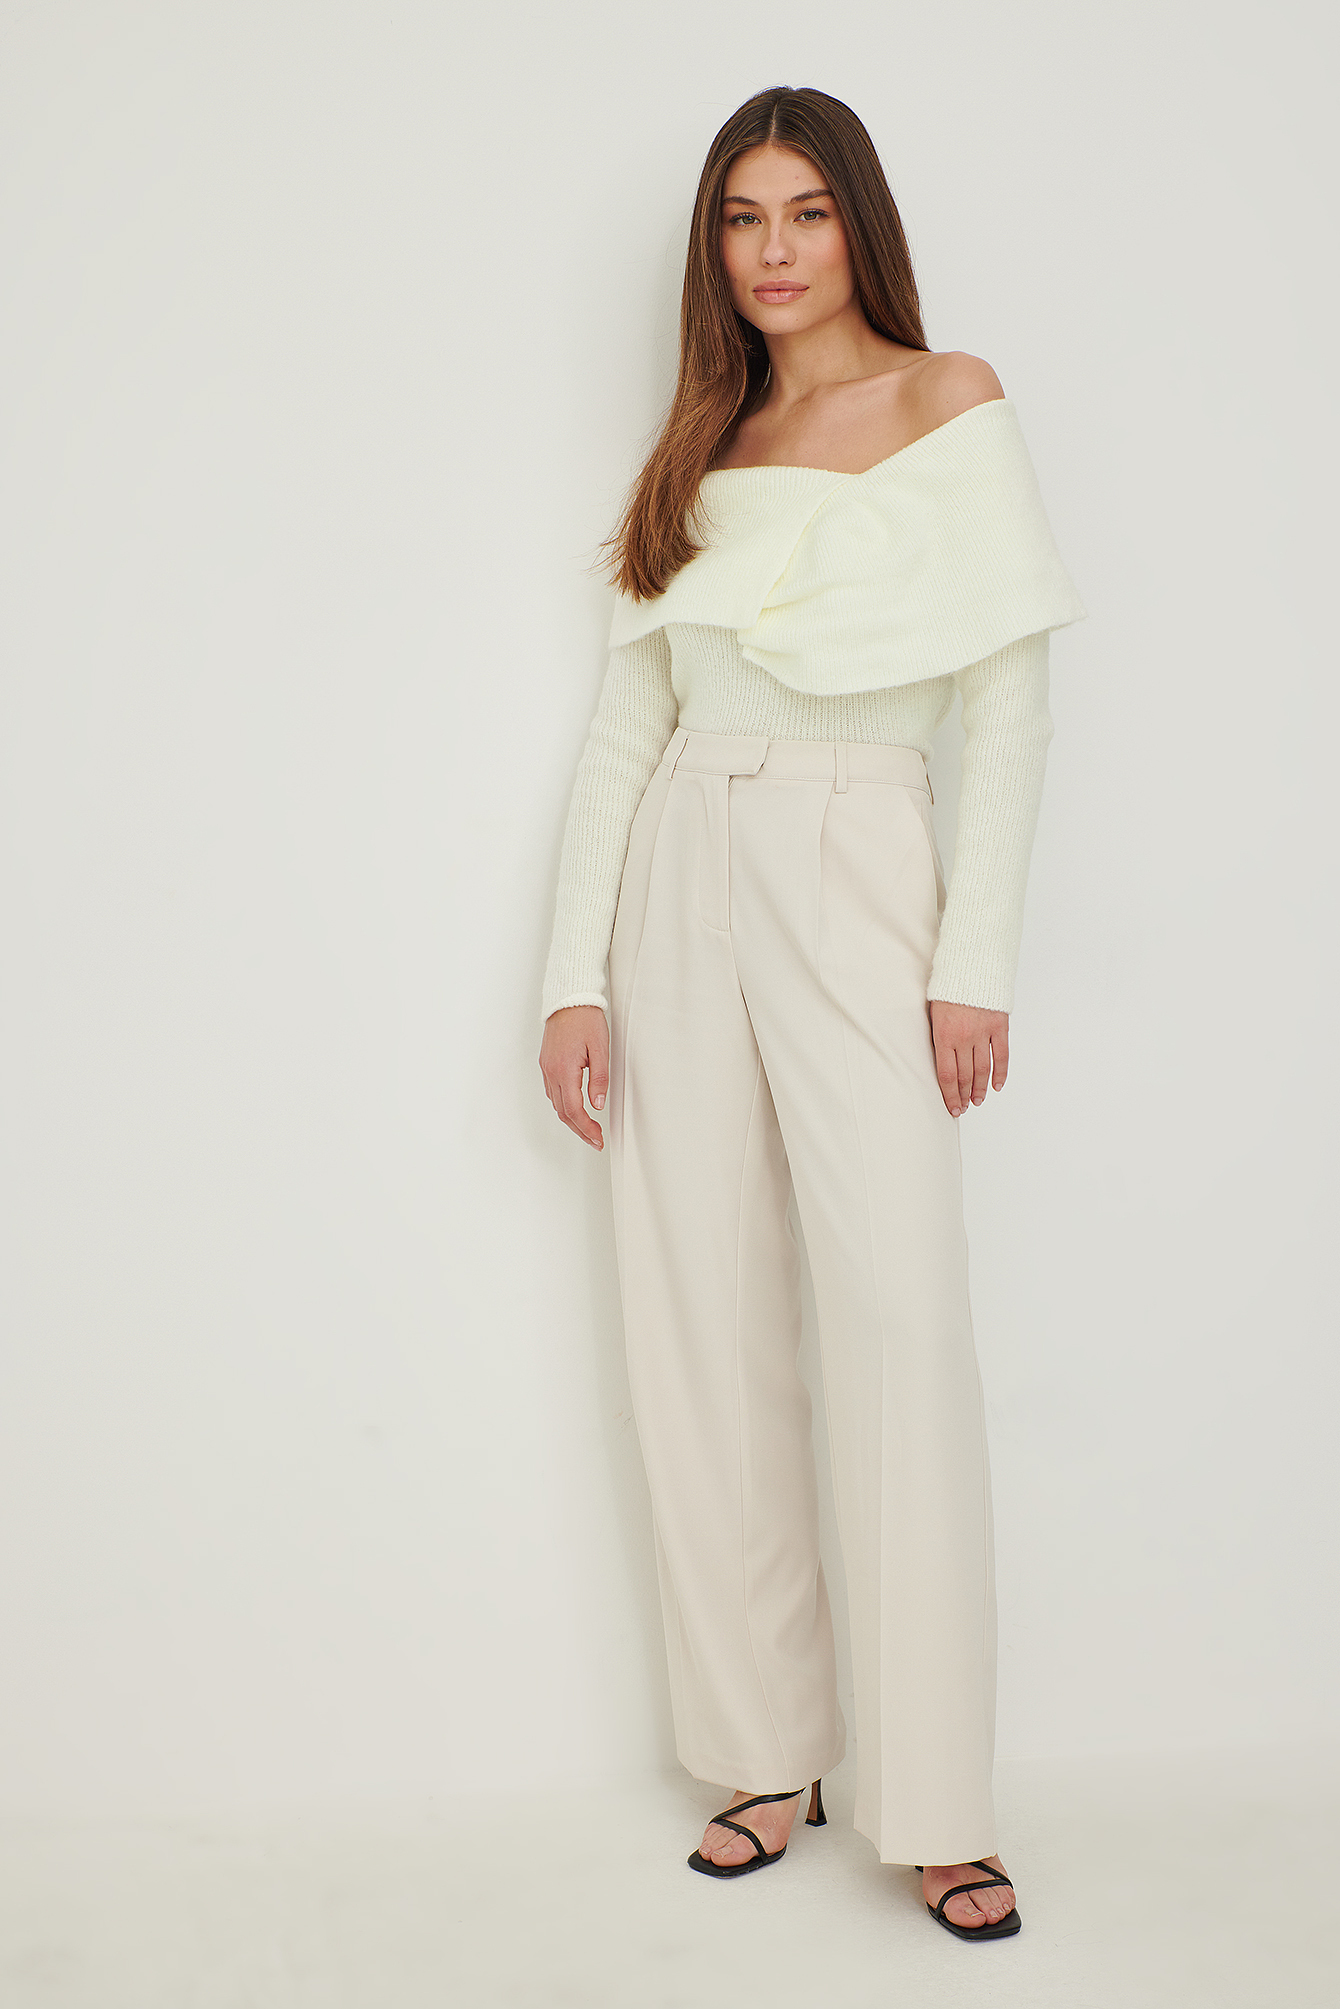 Recycled Soft Mid Waist Suit Pants Outfit